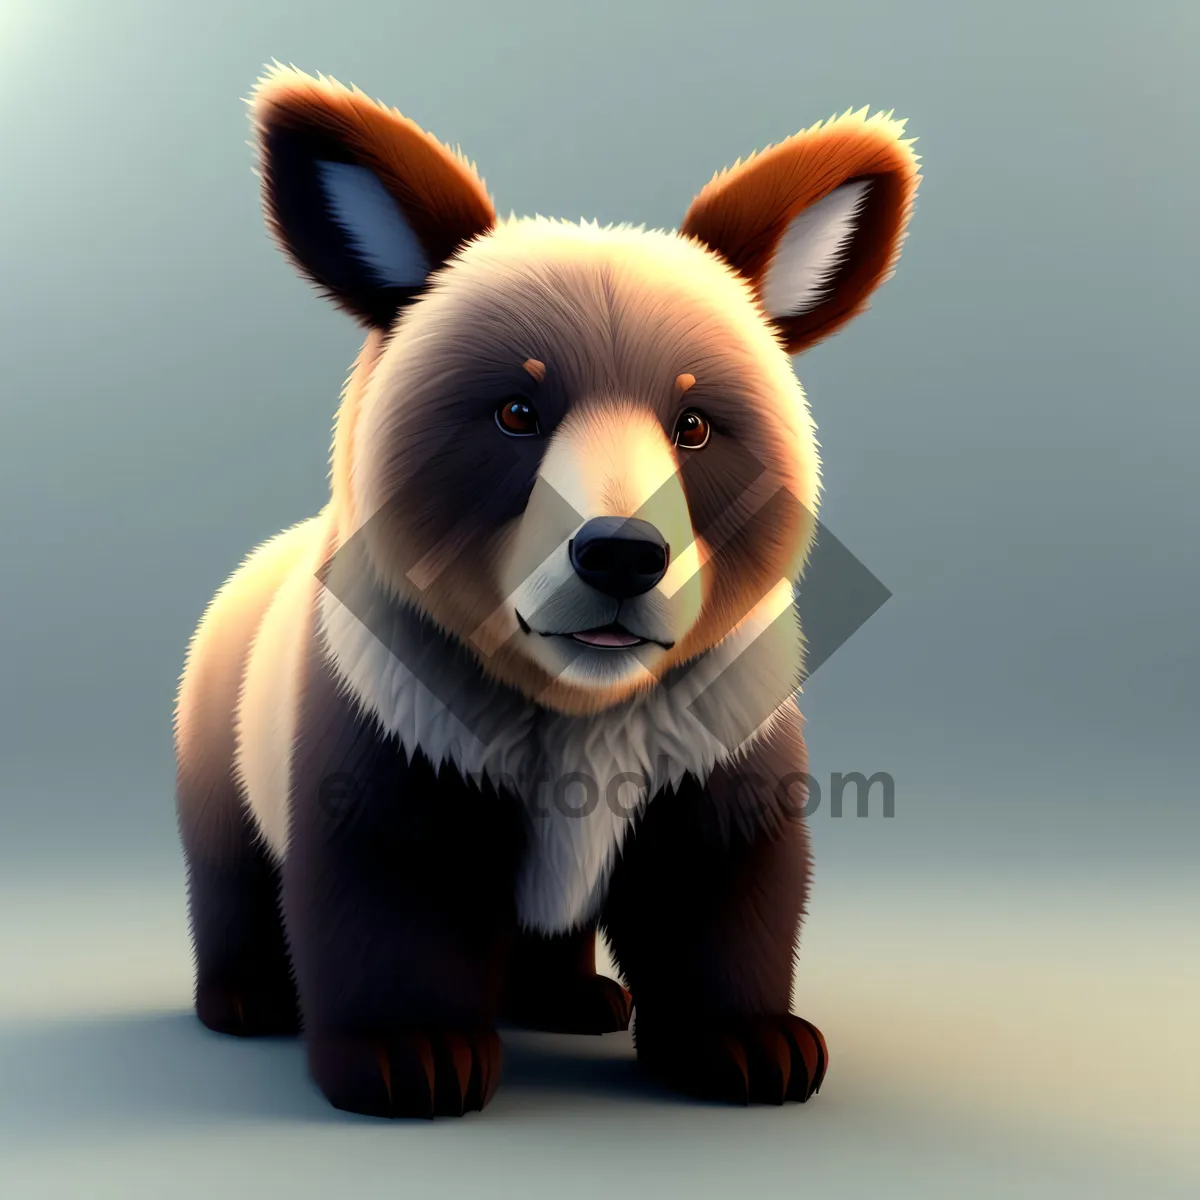 Picture of Furry Studio Teddy Cat - Cute 3D Toy Bear